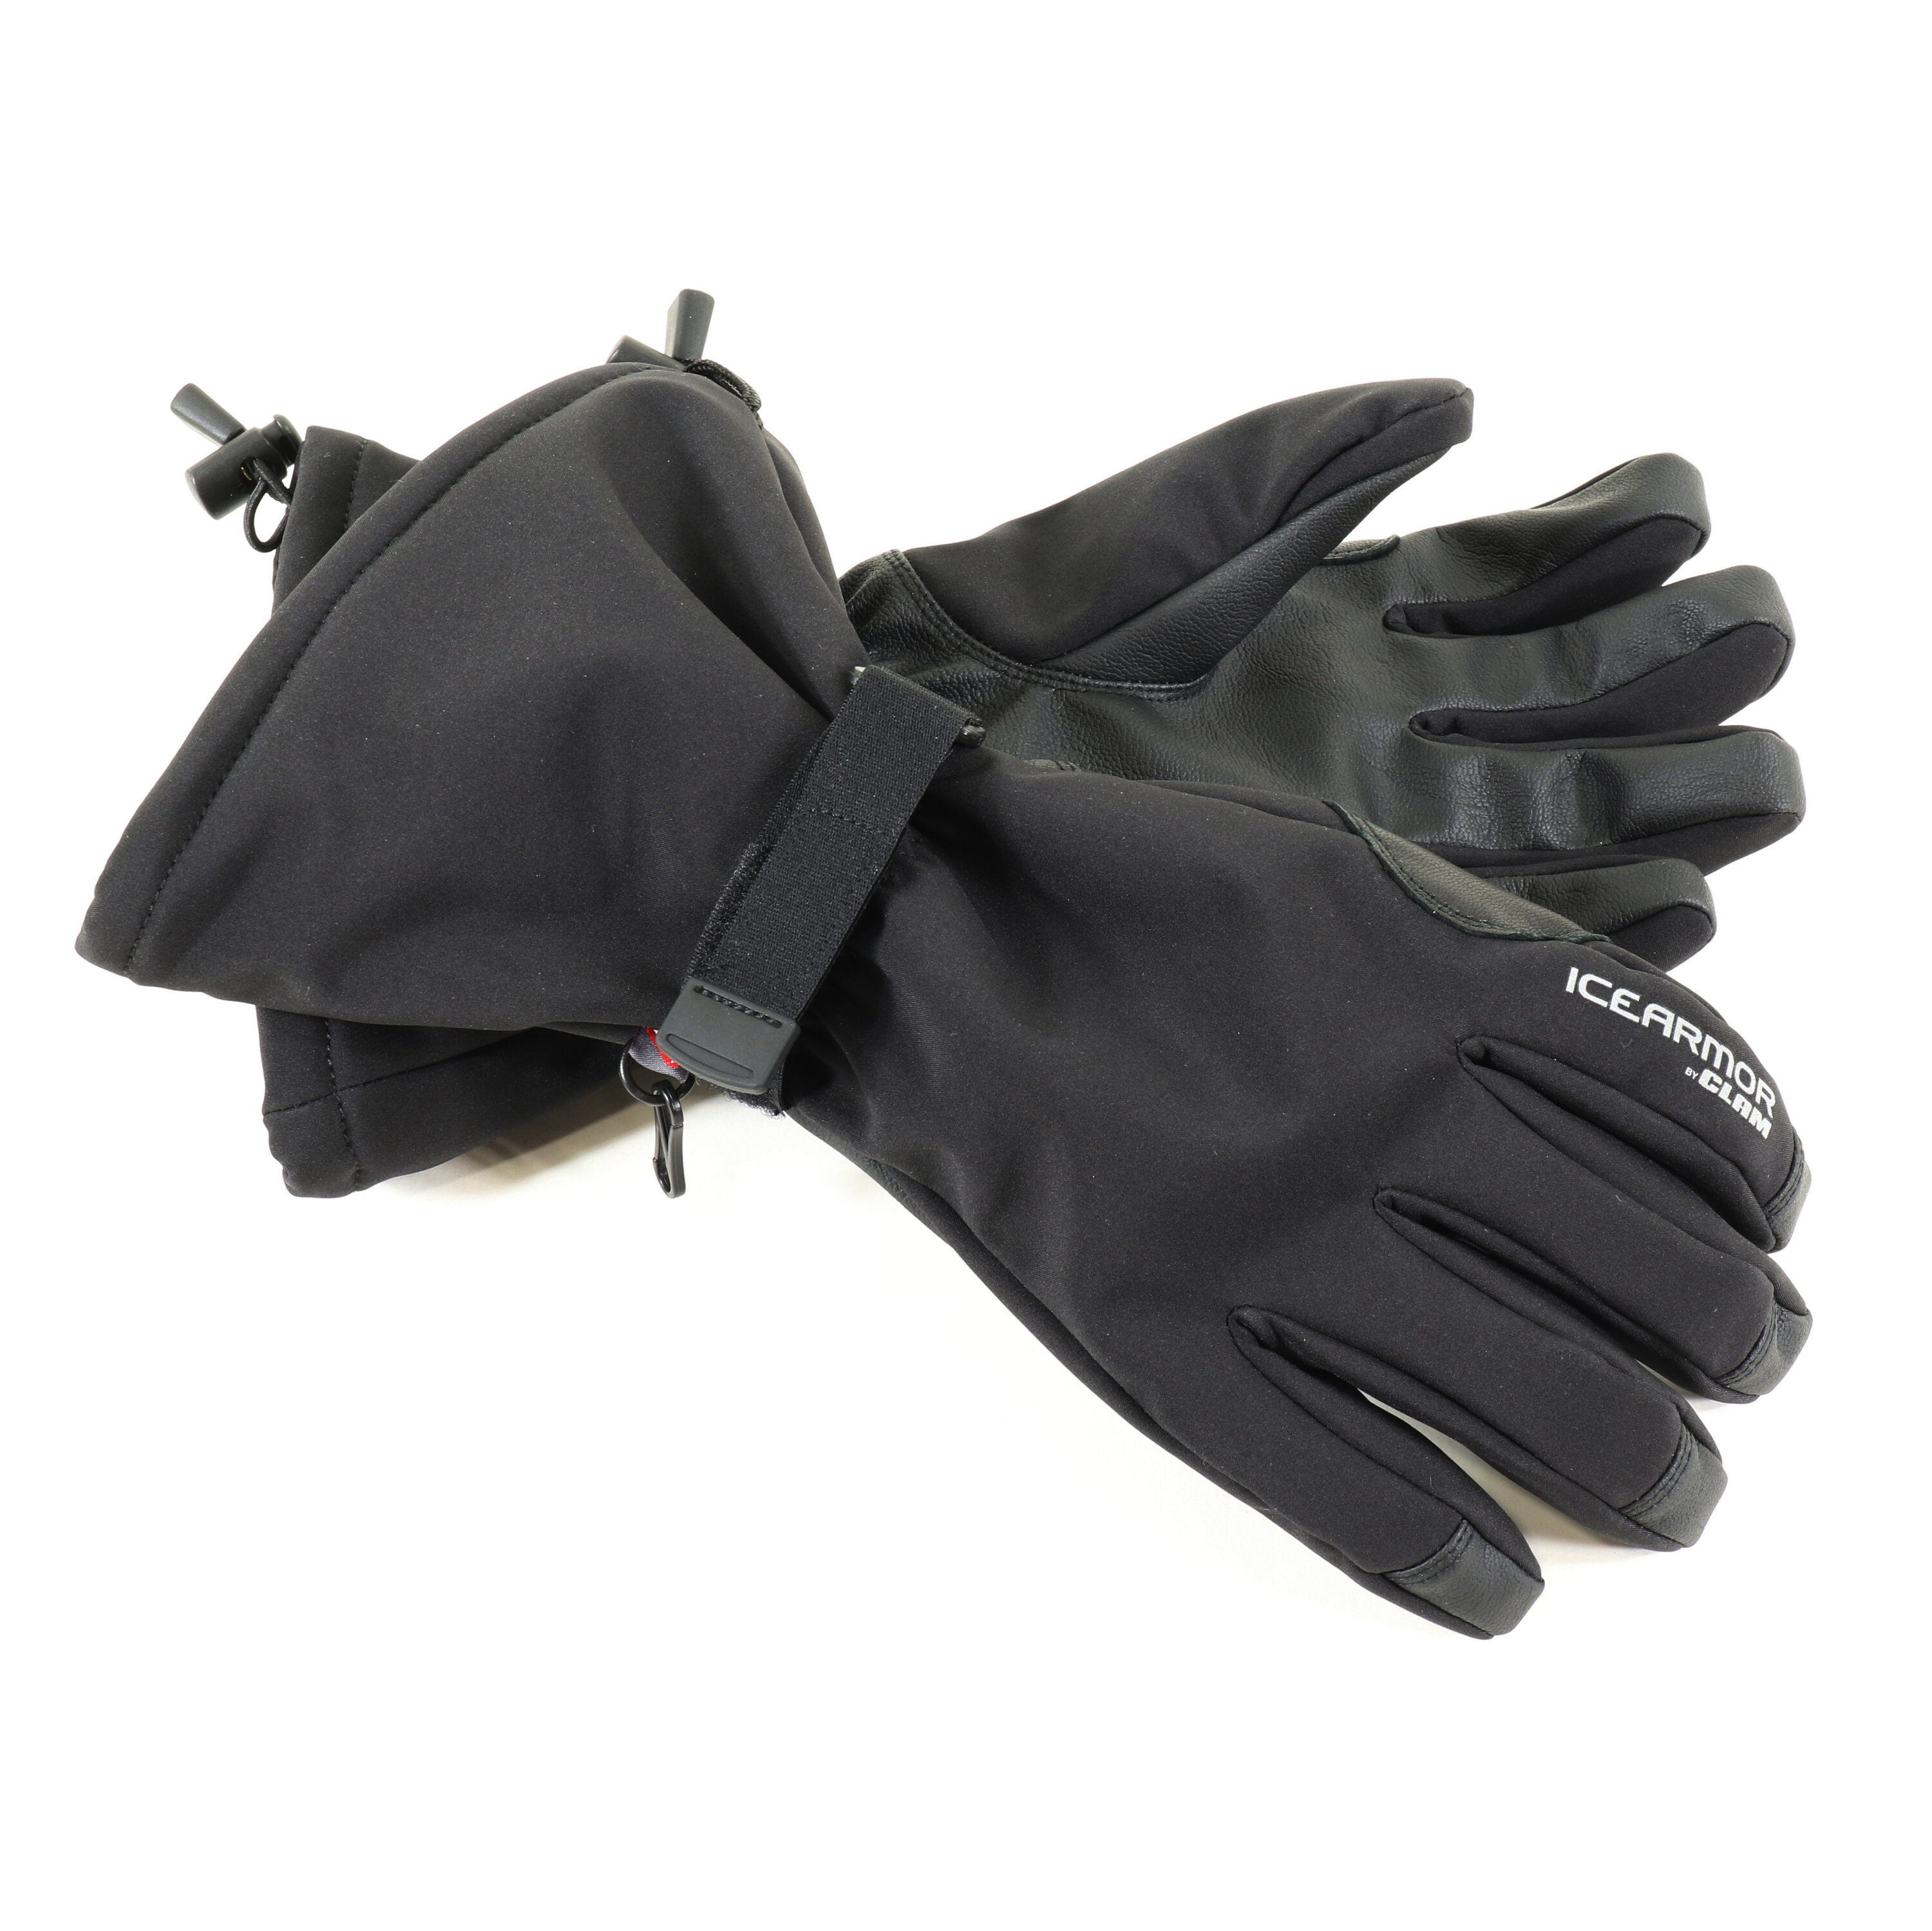 Clam Outdoors Women's Extreme Ice Fishing Glove - 2XL - Black in